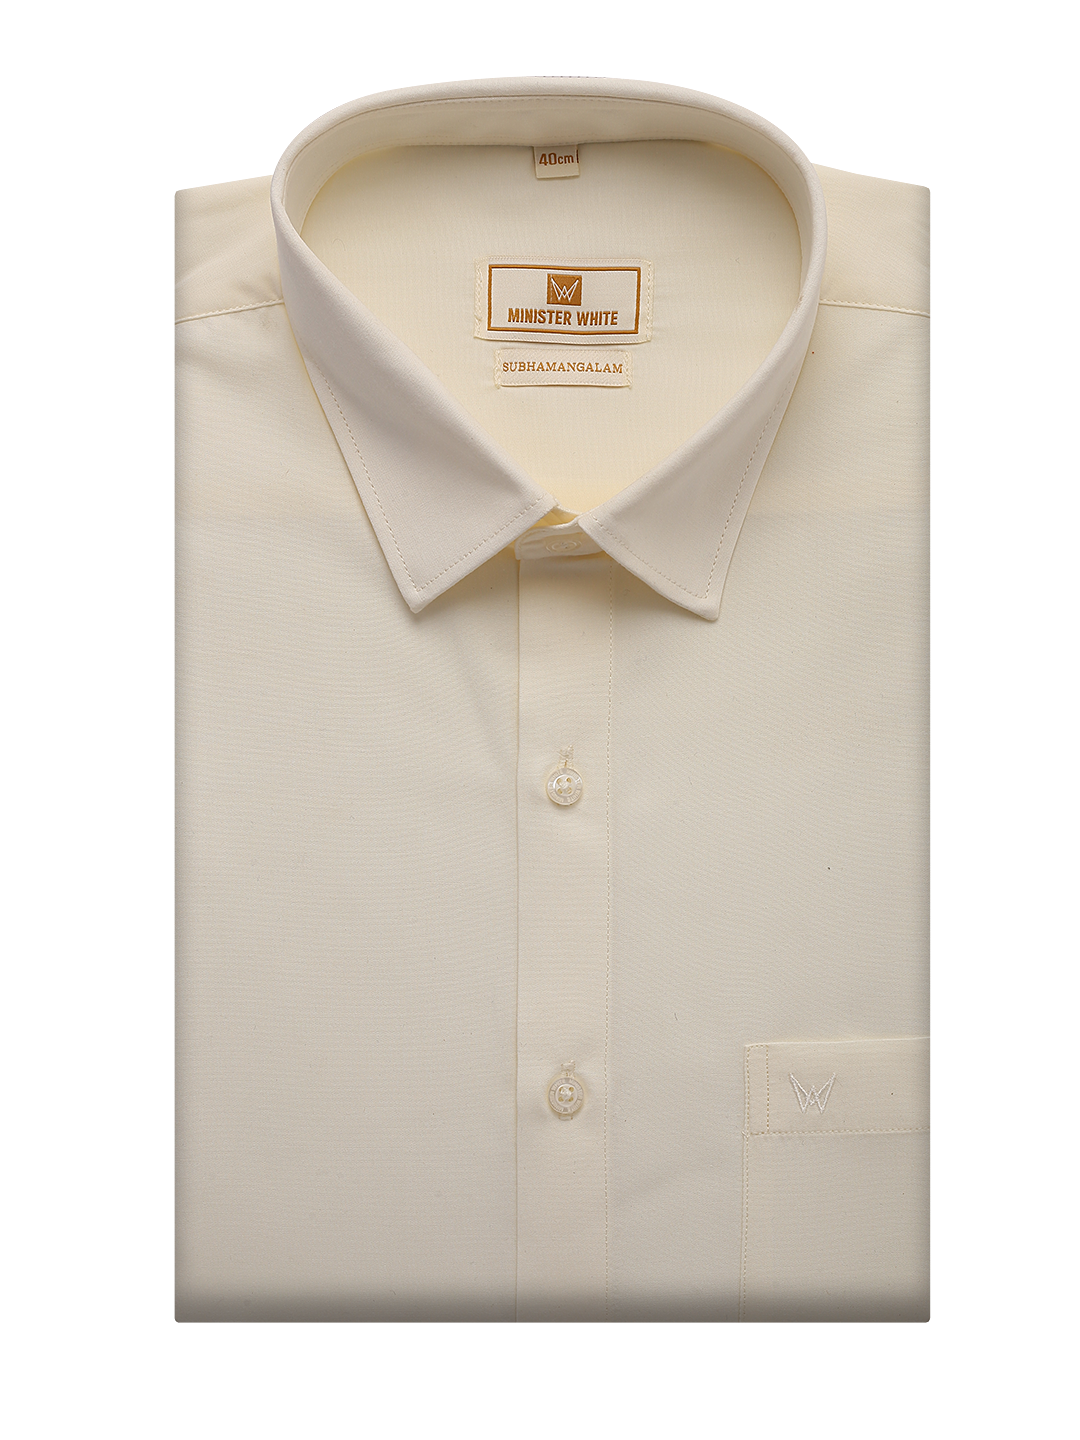 Mens Cotton Regular Fit Cream Colour Shirt Subhamangalam by Minister White